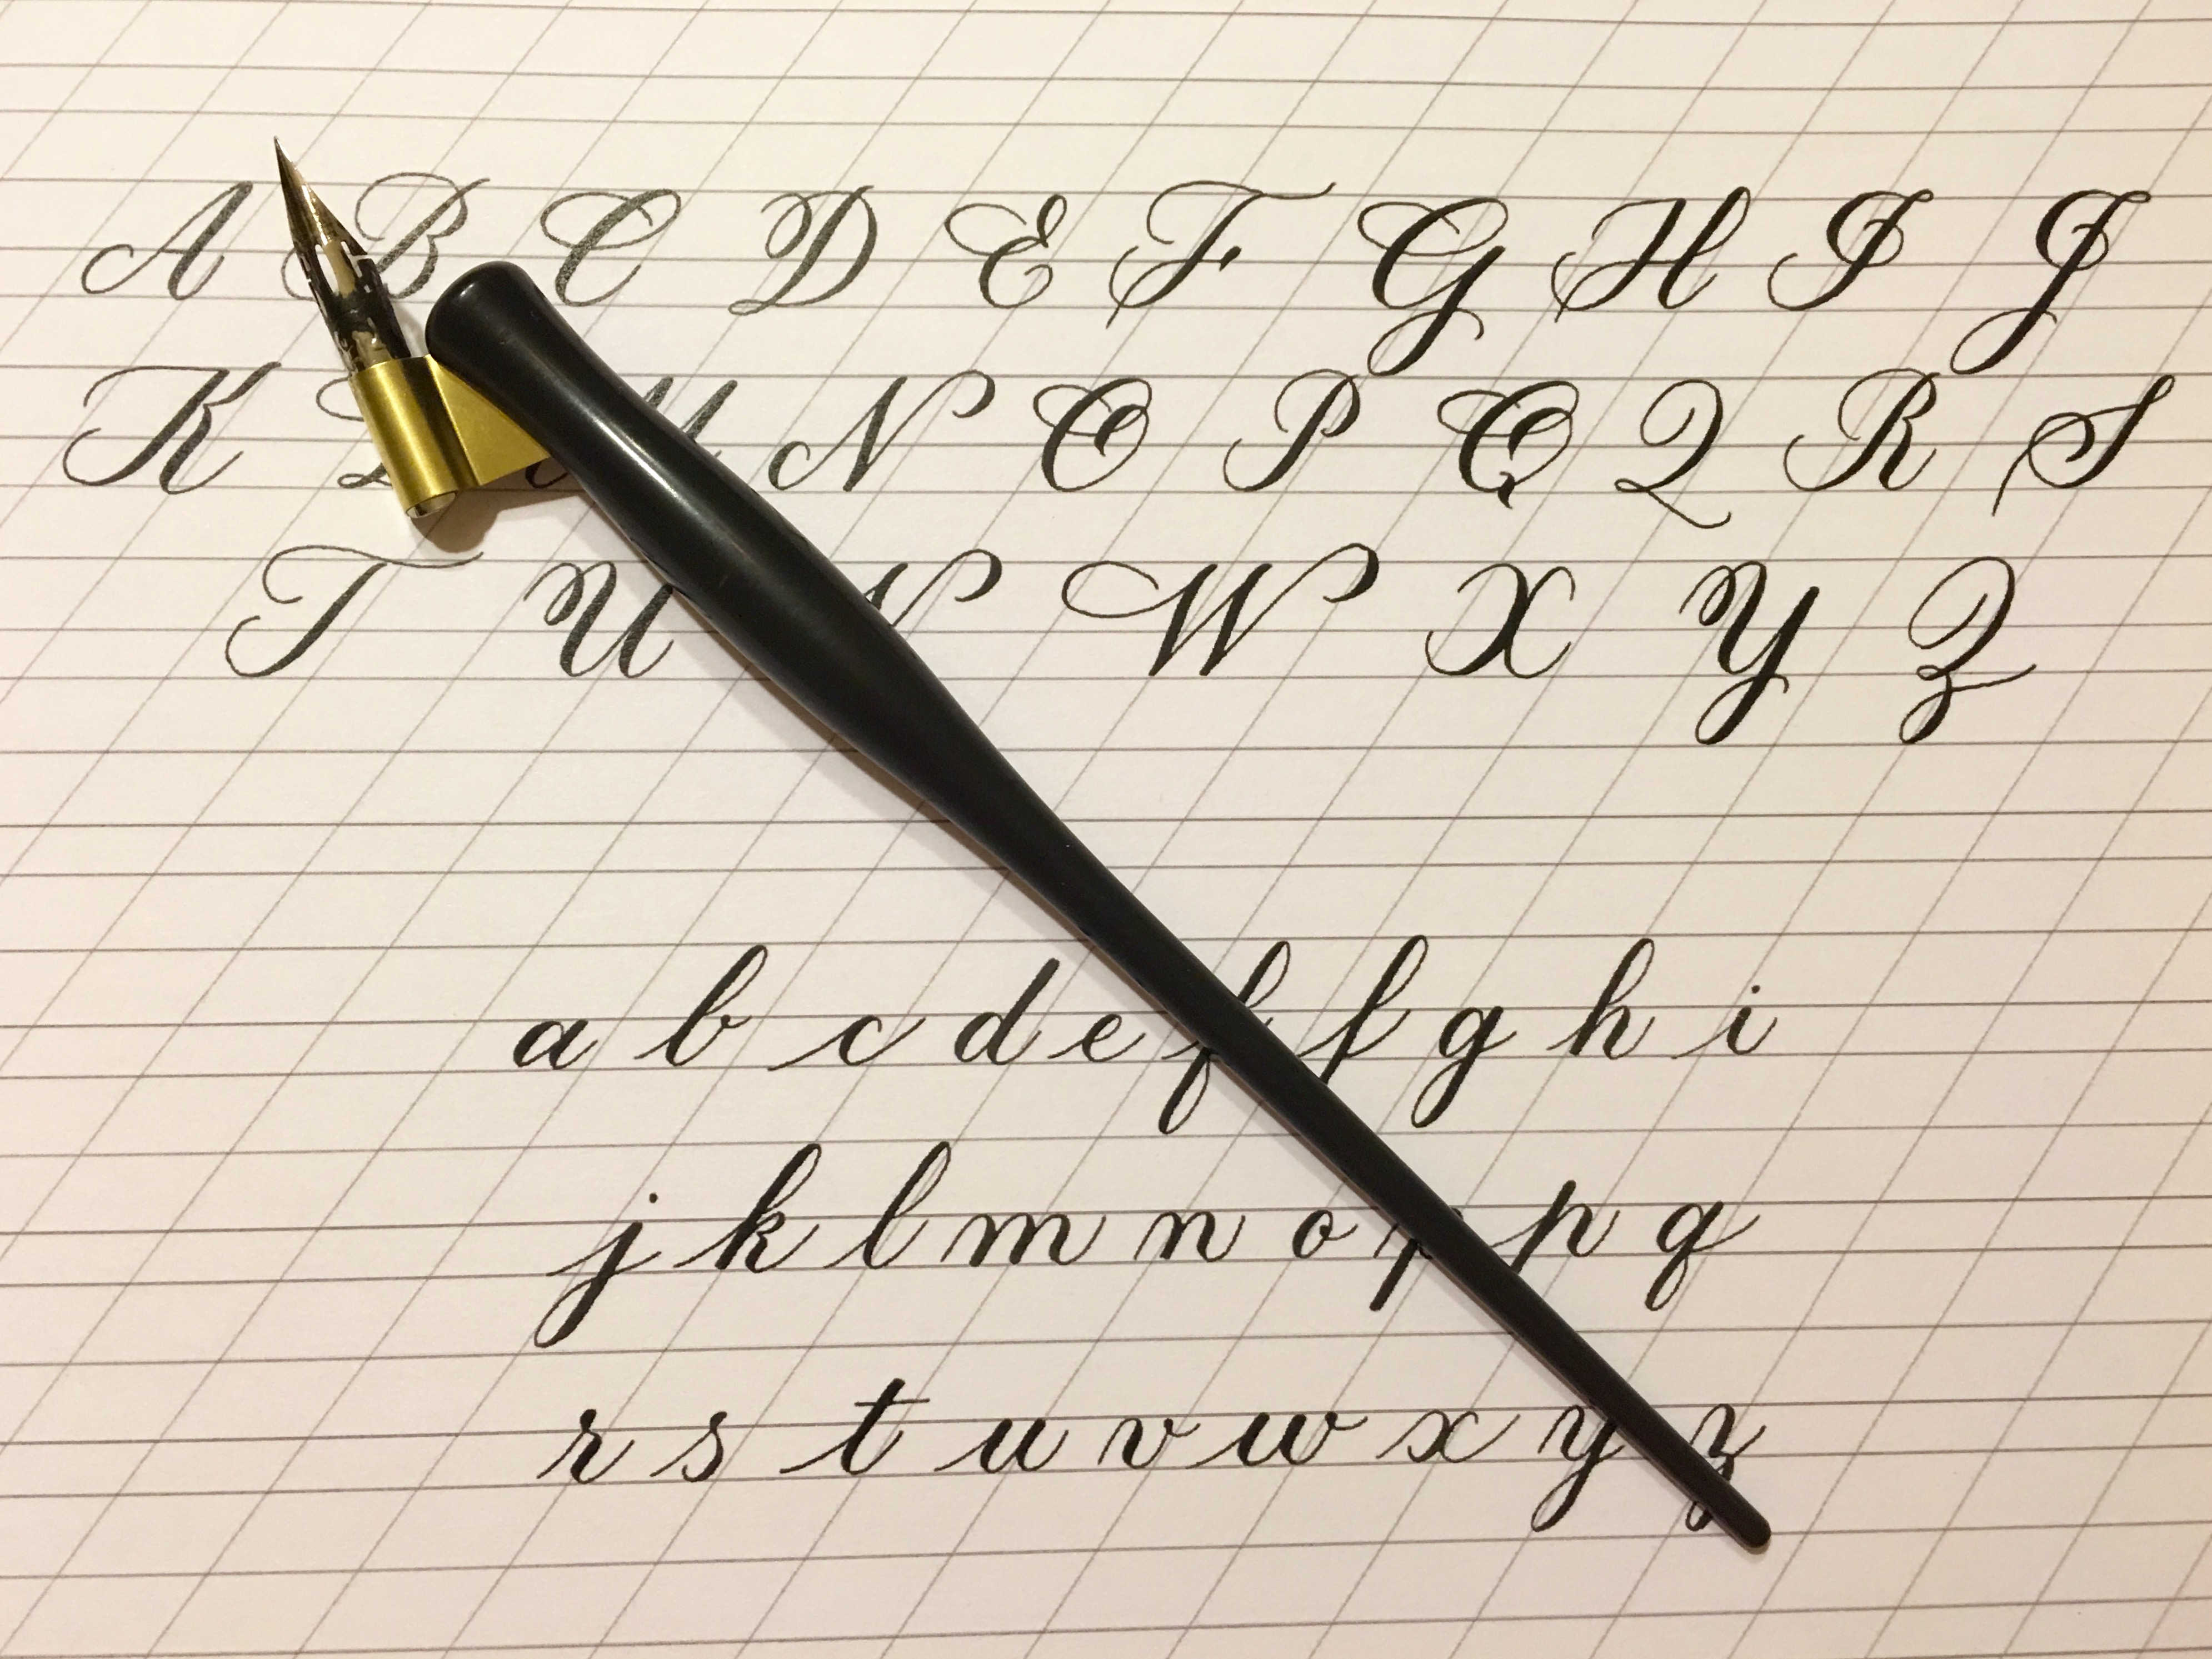 How To Do Calligraphy With A Calligraphy Pen This tutorial shows you